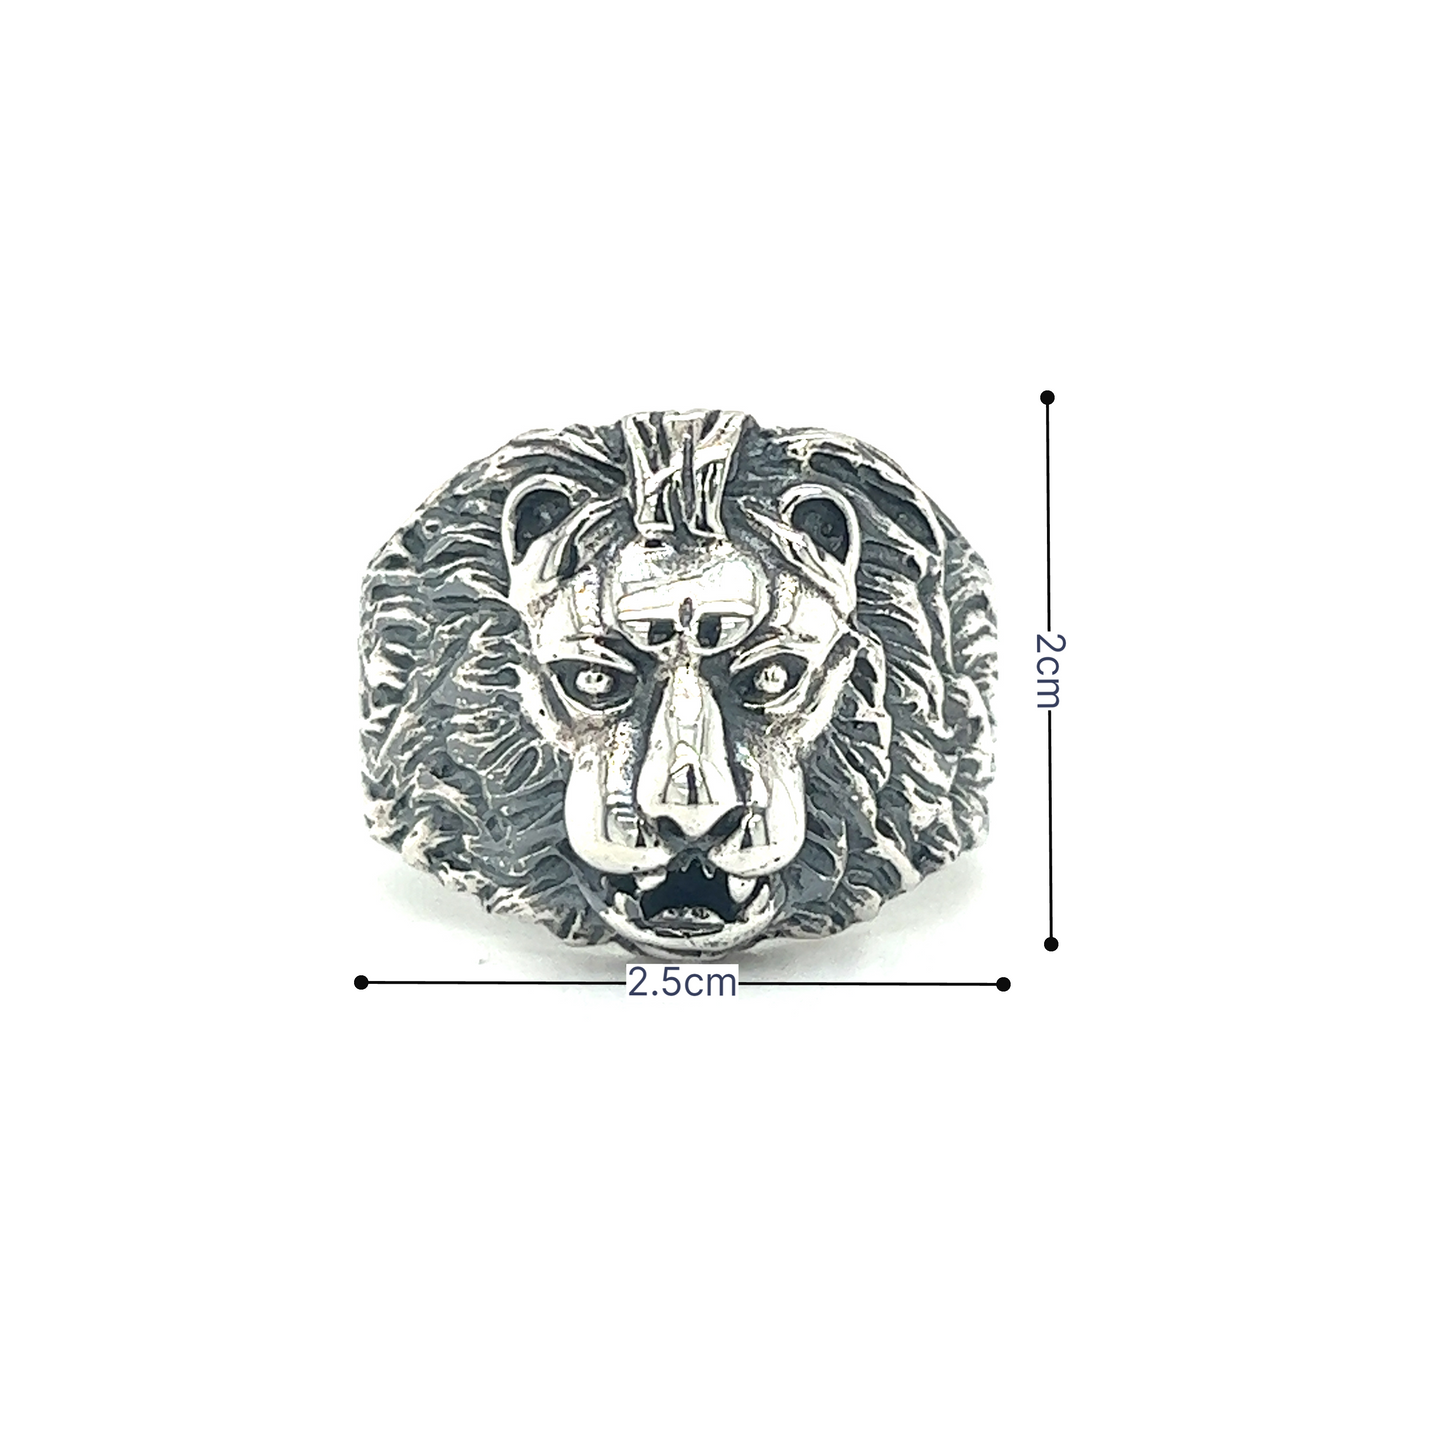 A powerful Super Silver Silver Lion Face Ring symbolizing authority and strength.